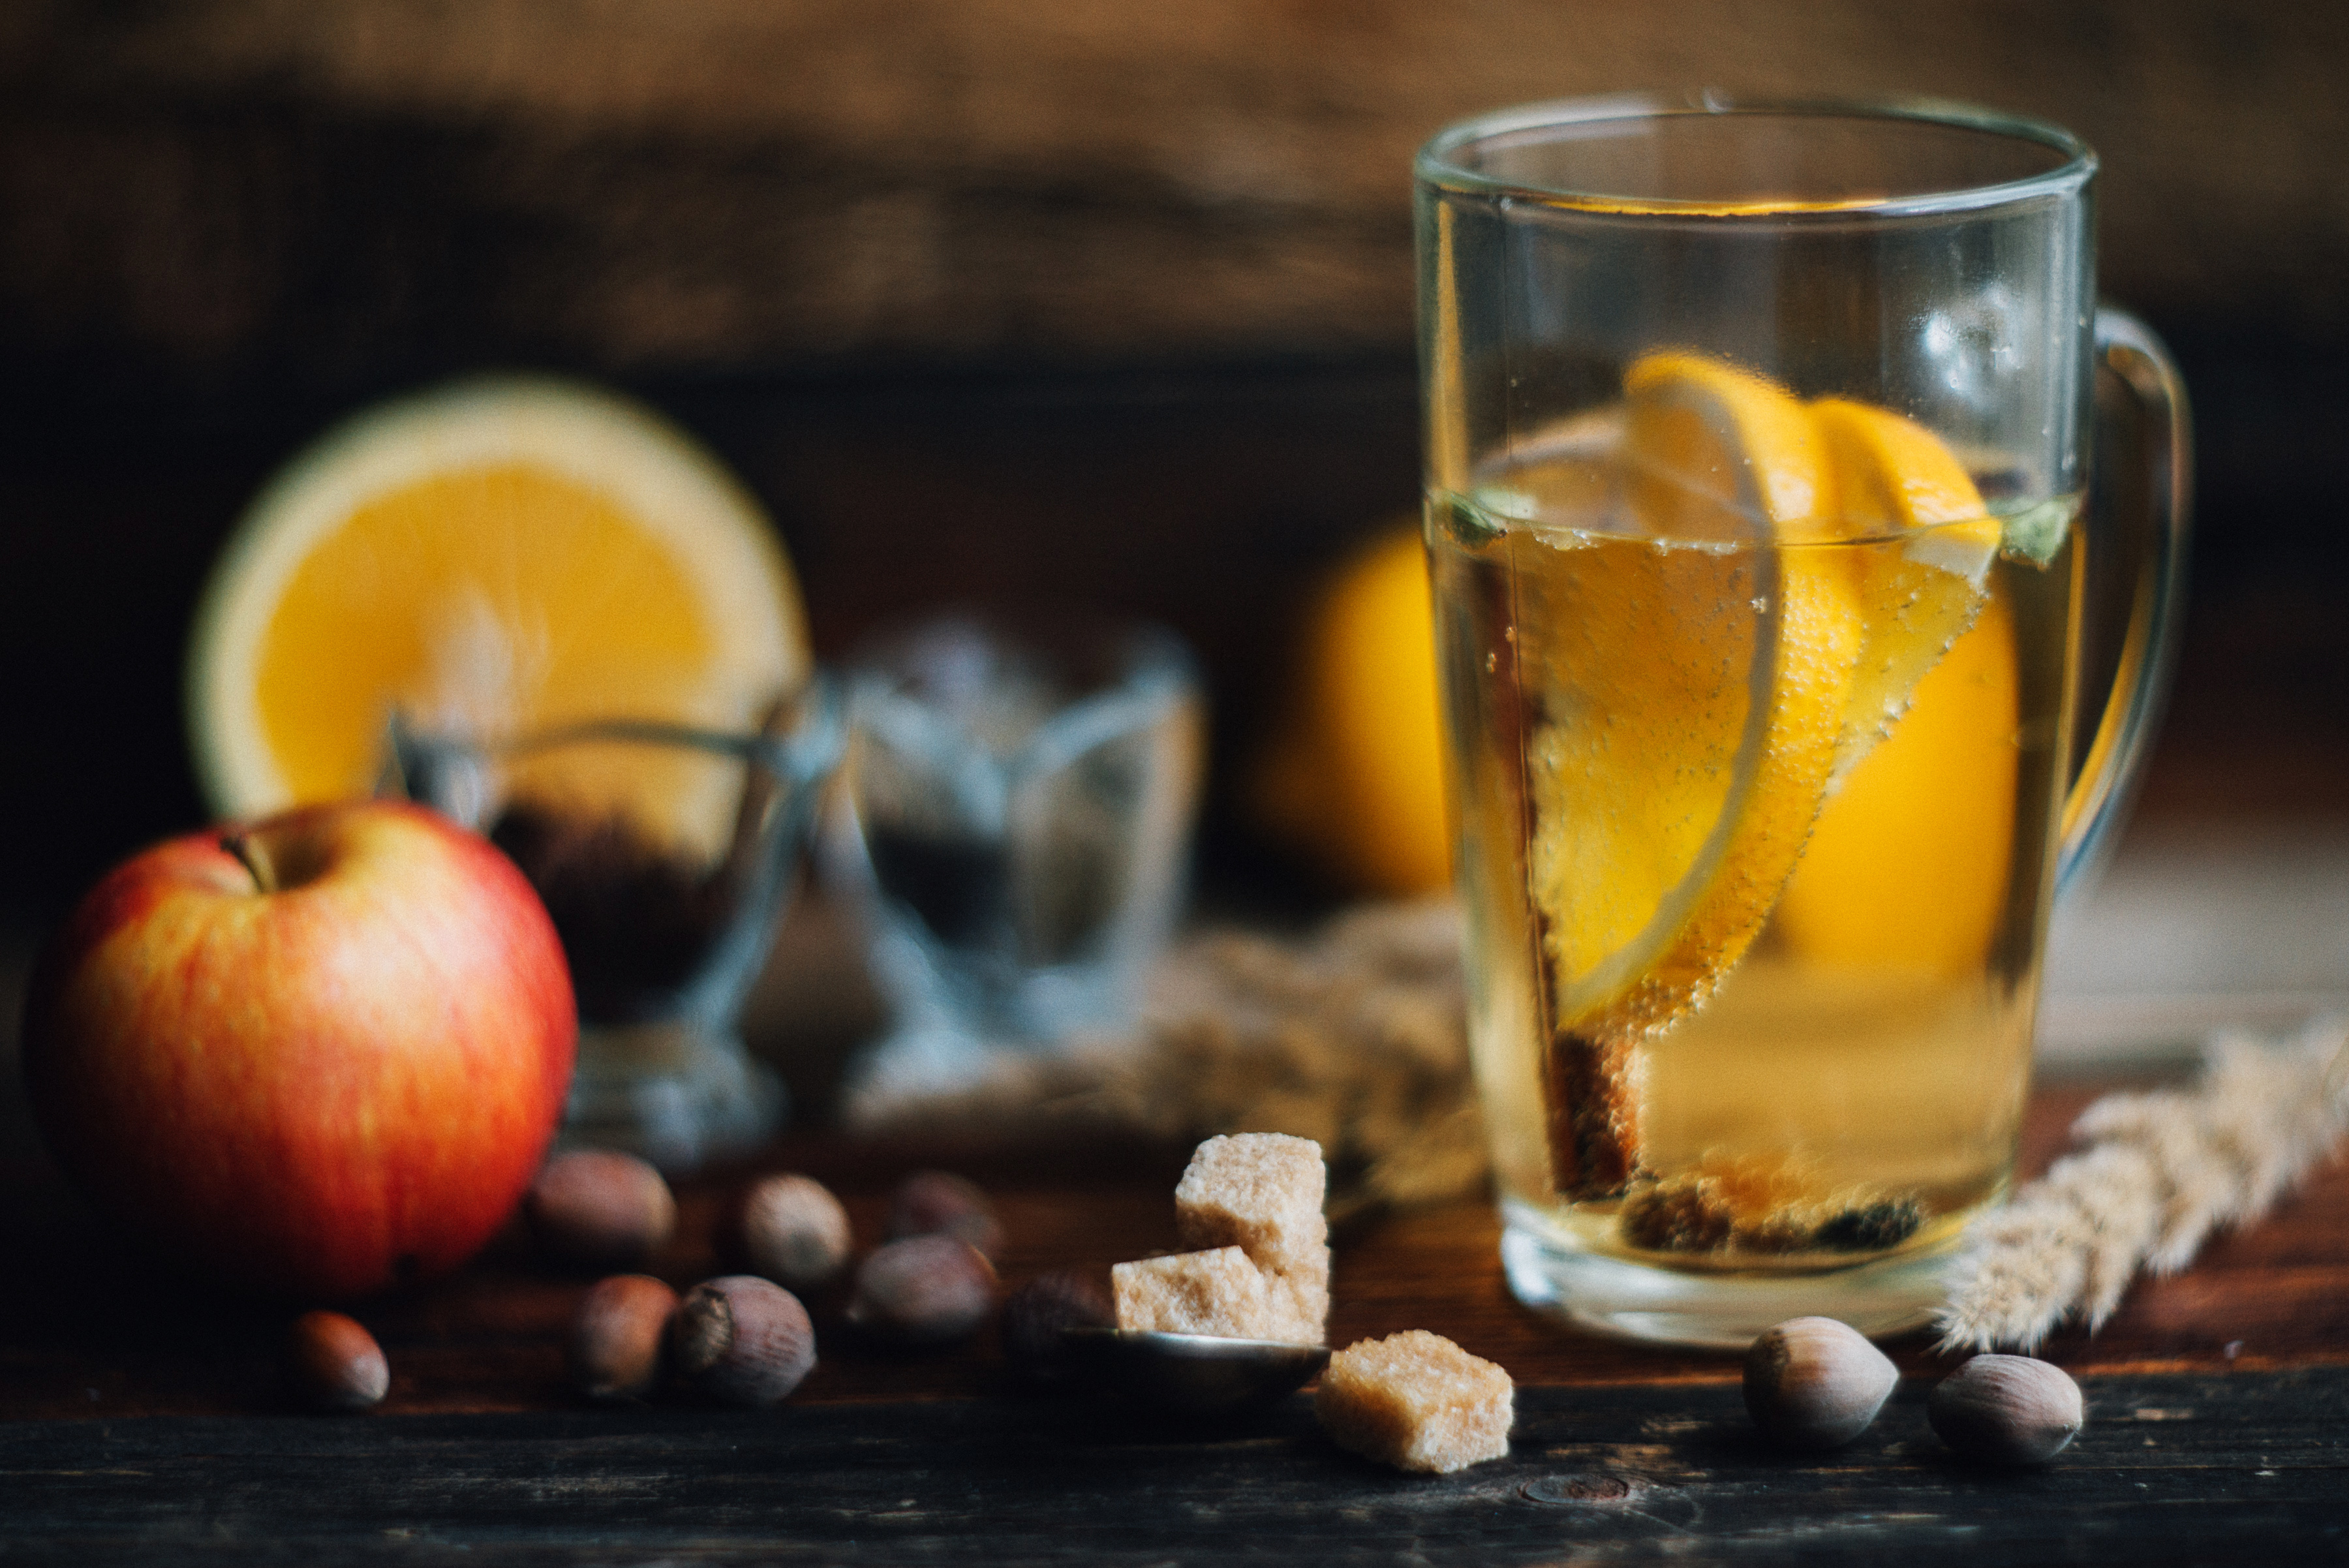 Hot toddy drink (apple orange rum punch) for Christmas and winter holidays - festive Christmas homemade drinks